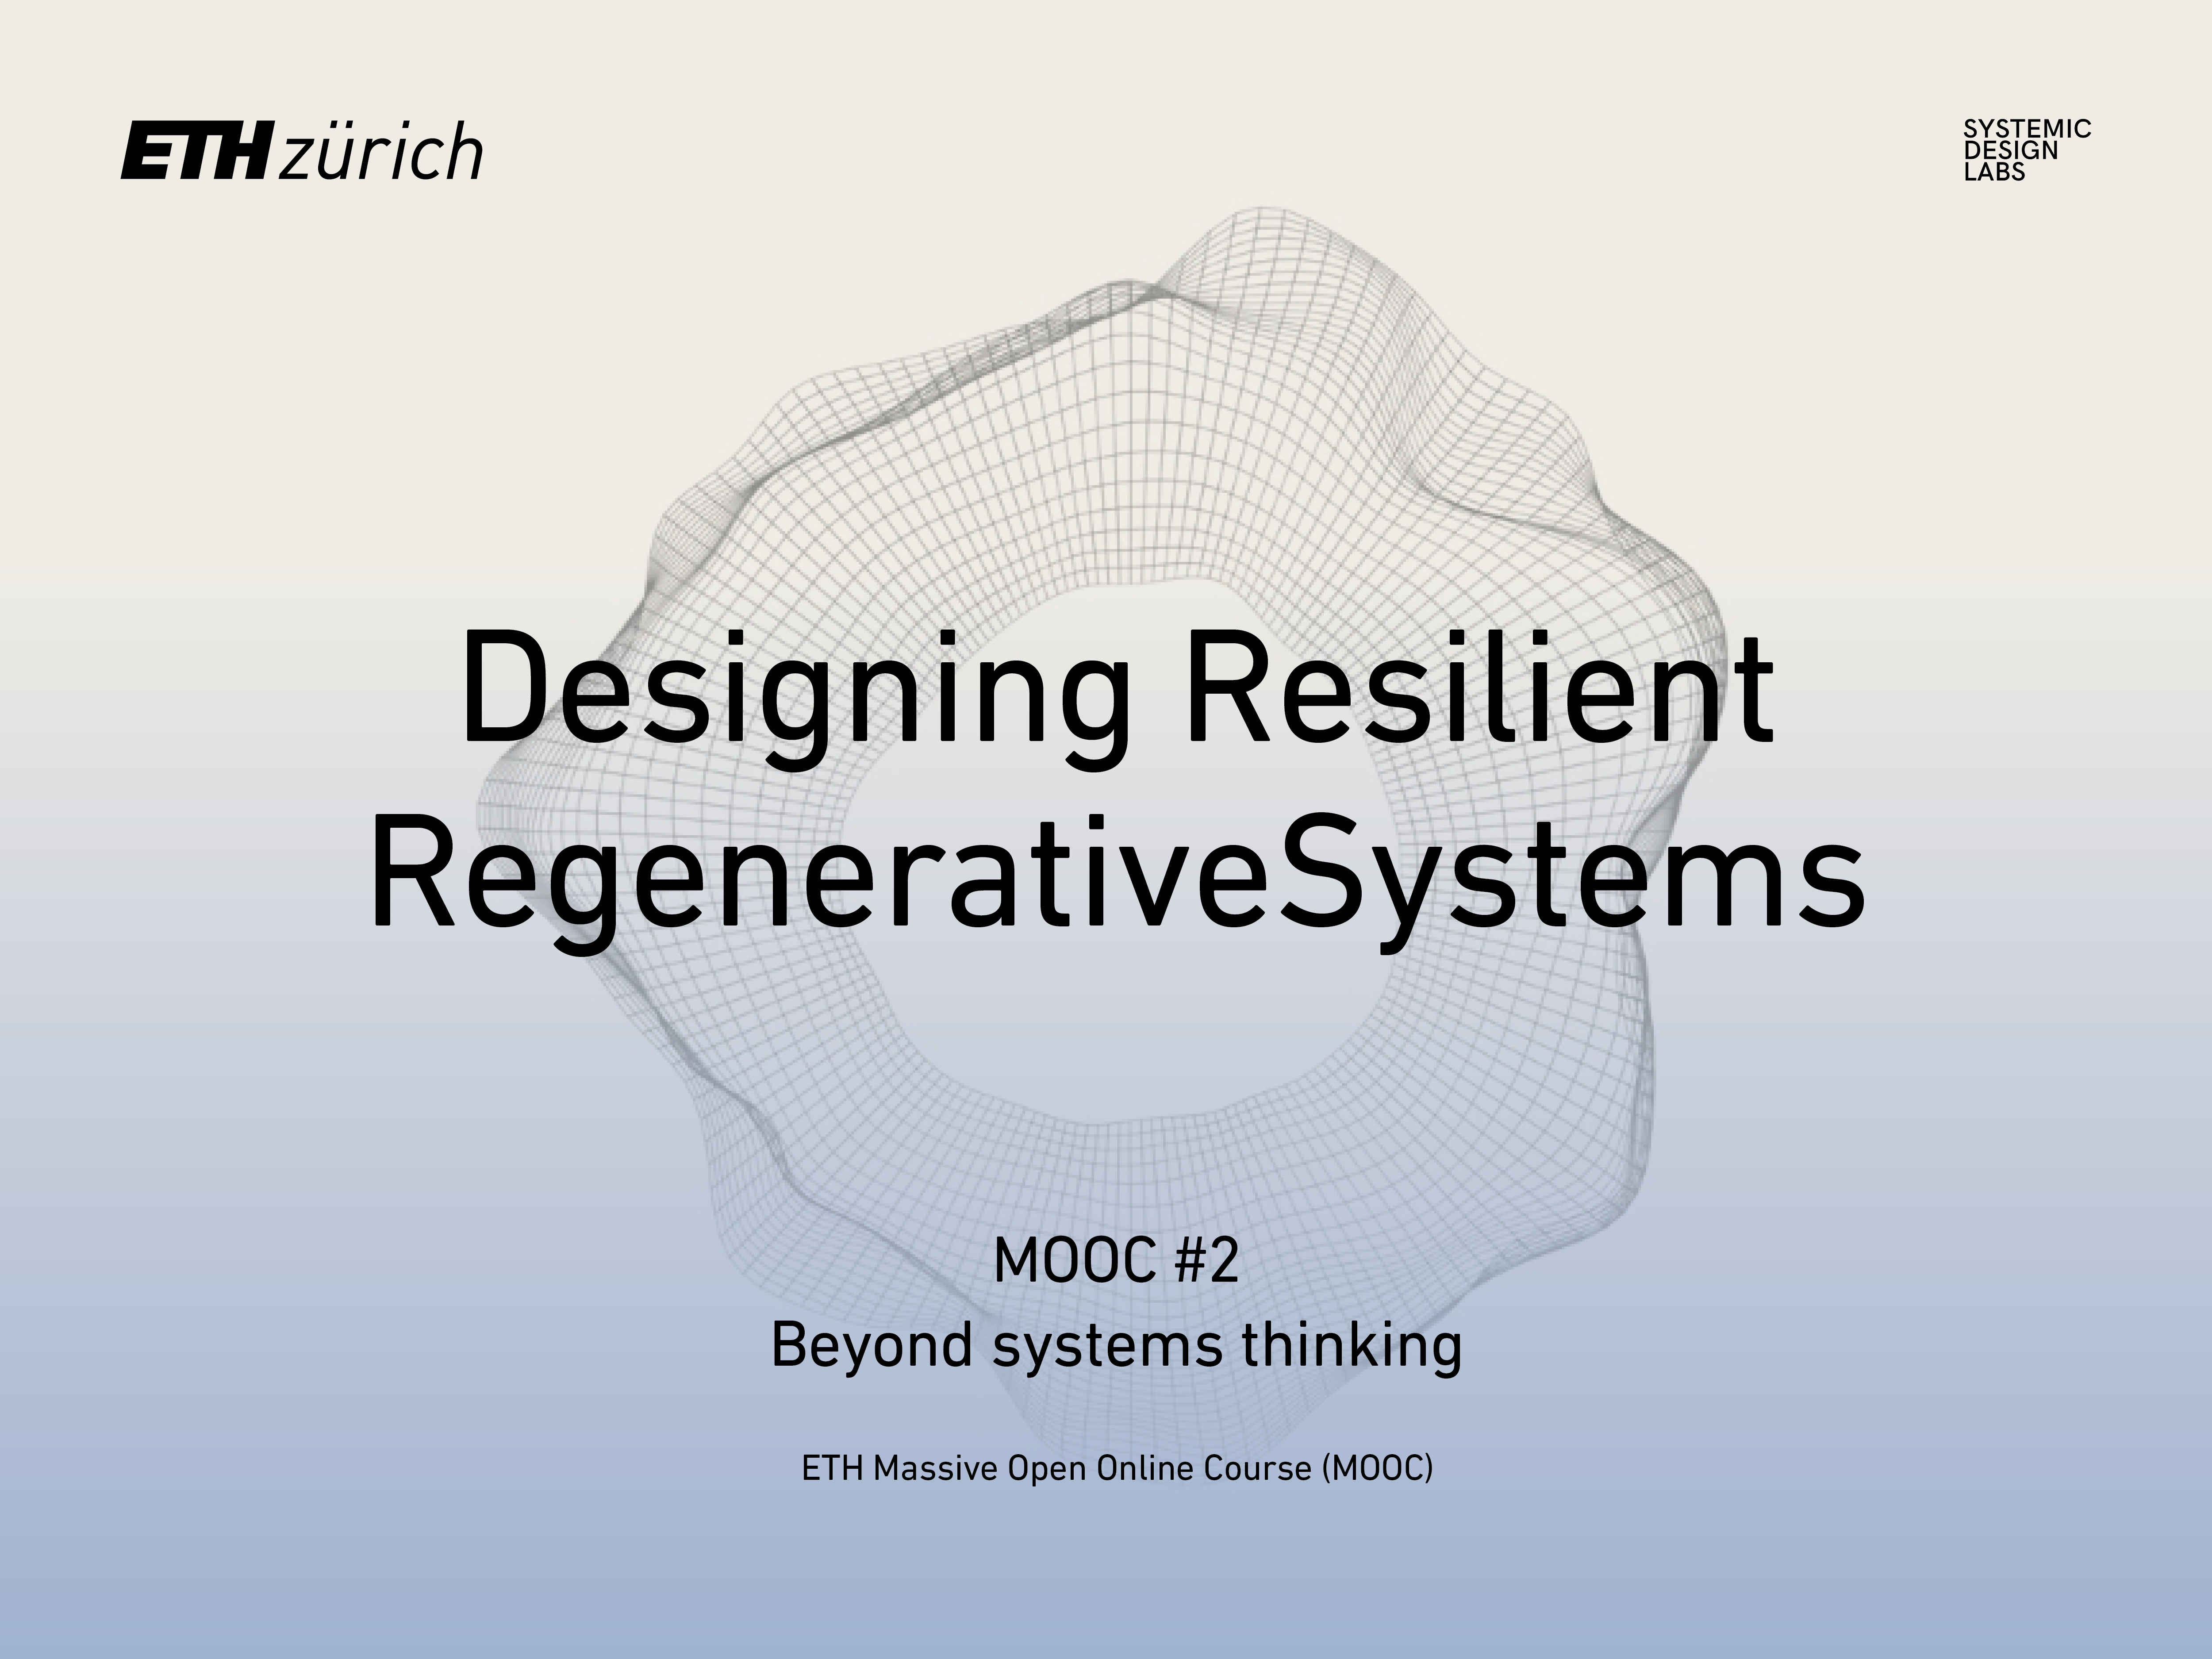 Updated DRRS MOOC 2: Beyond Systems Thinking